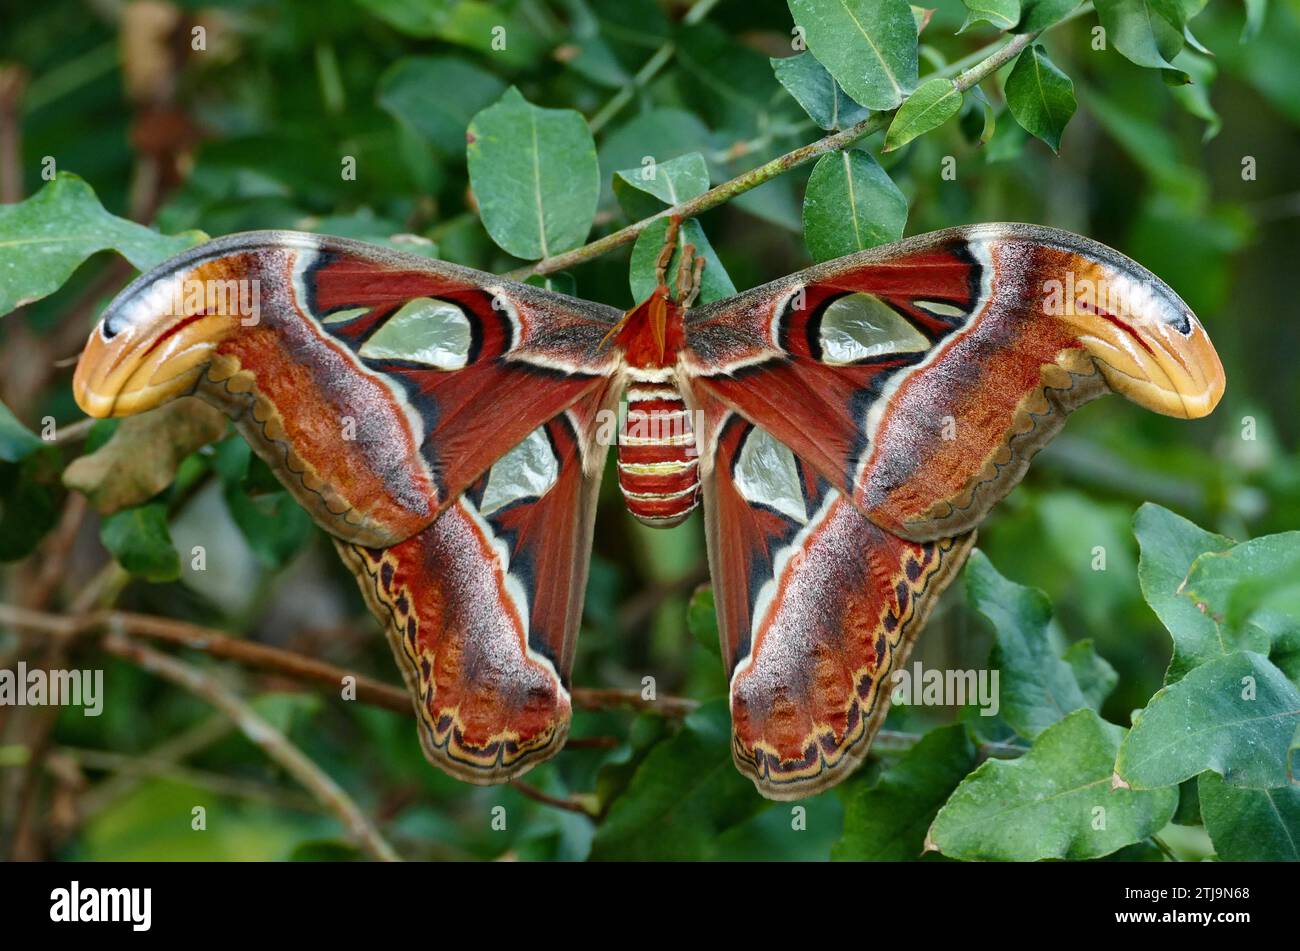 Attacus atlas, the Atlas moth, is a large saturniid moth endemic to the forests of Asia. The species was first described by Carl Linnaeus in his 1758 10th edition of Systema Naturae. The Atlas moth is one of the largest lepidopterans, with a wingspan measuring up to 24 cm.   Credit: BSpragg Stock Photo